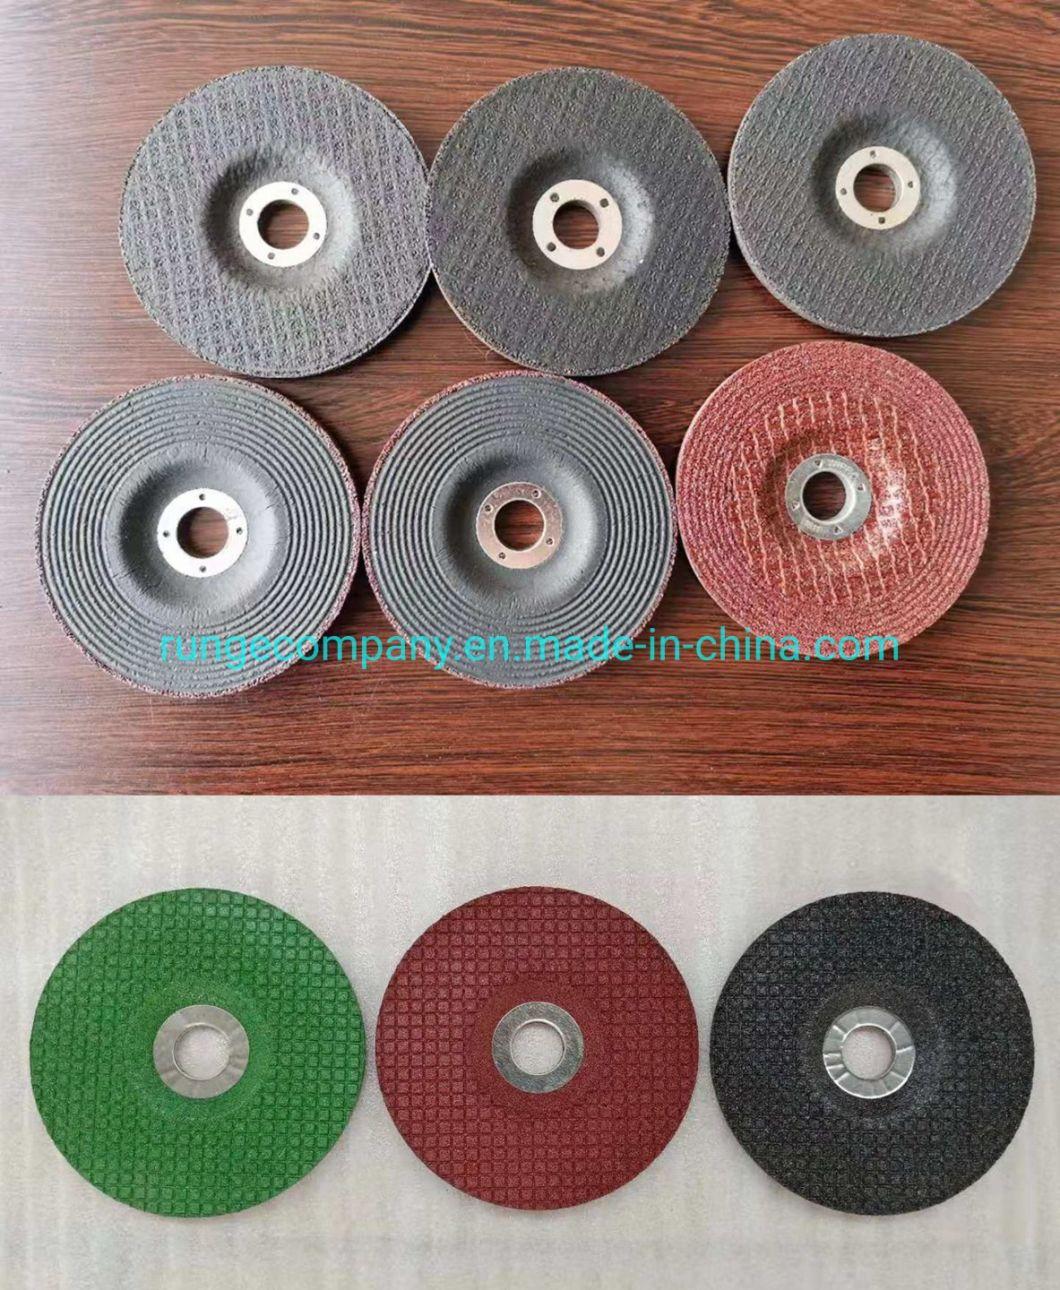 Power Electric Tools Accessories Grinding Disc Wheels 4.5" for Fiberglass, Steel, Iron, Plastic, Stainless Steel